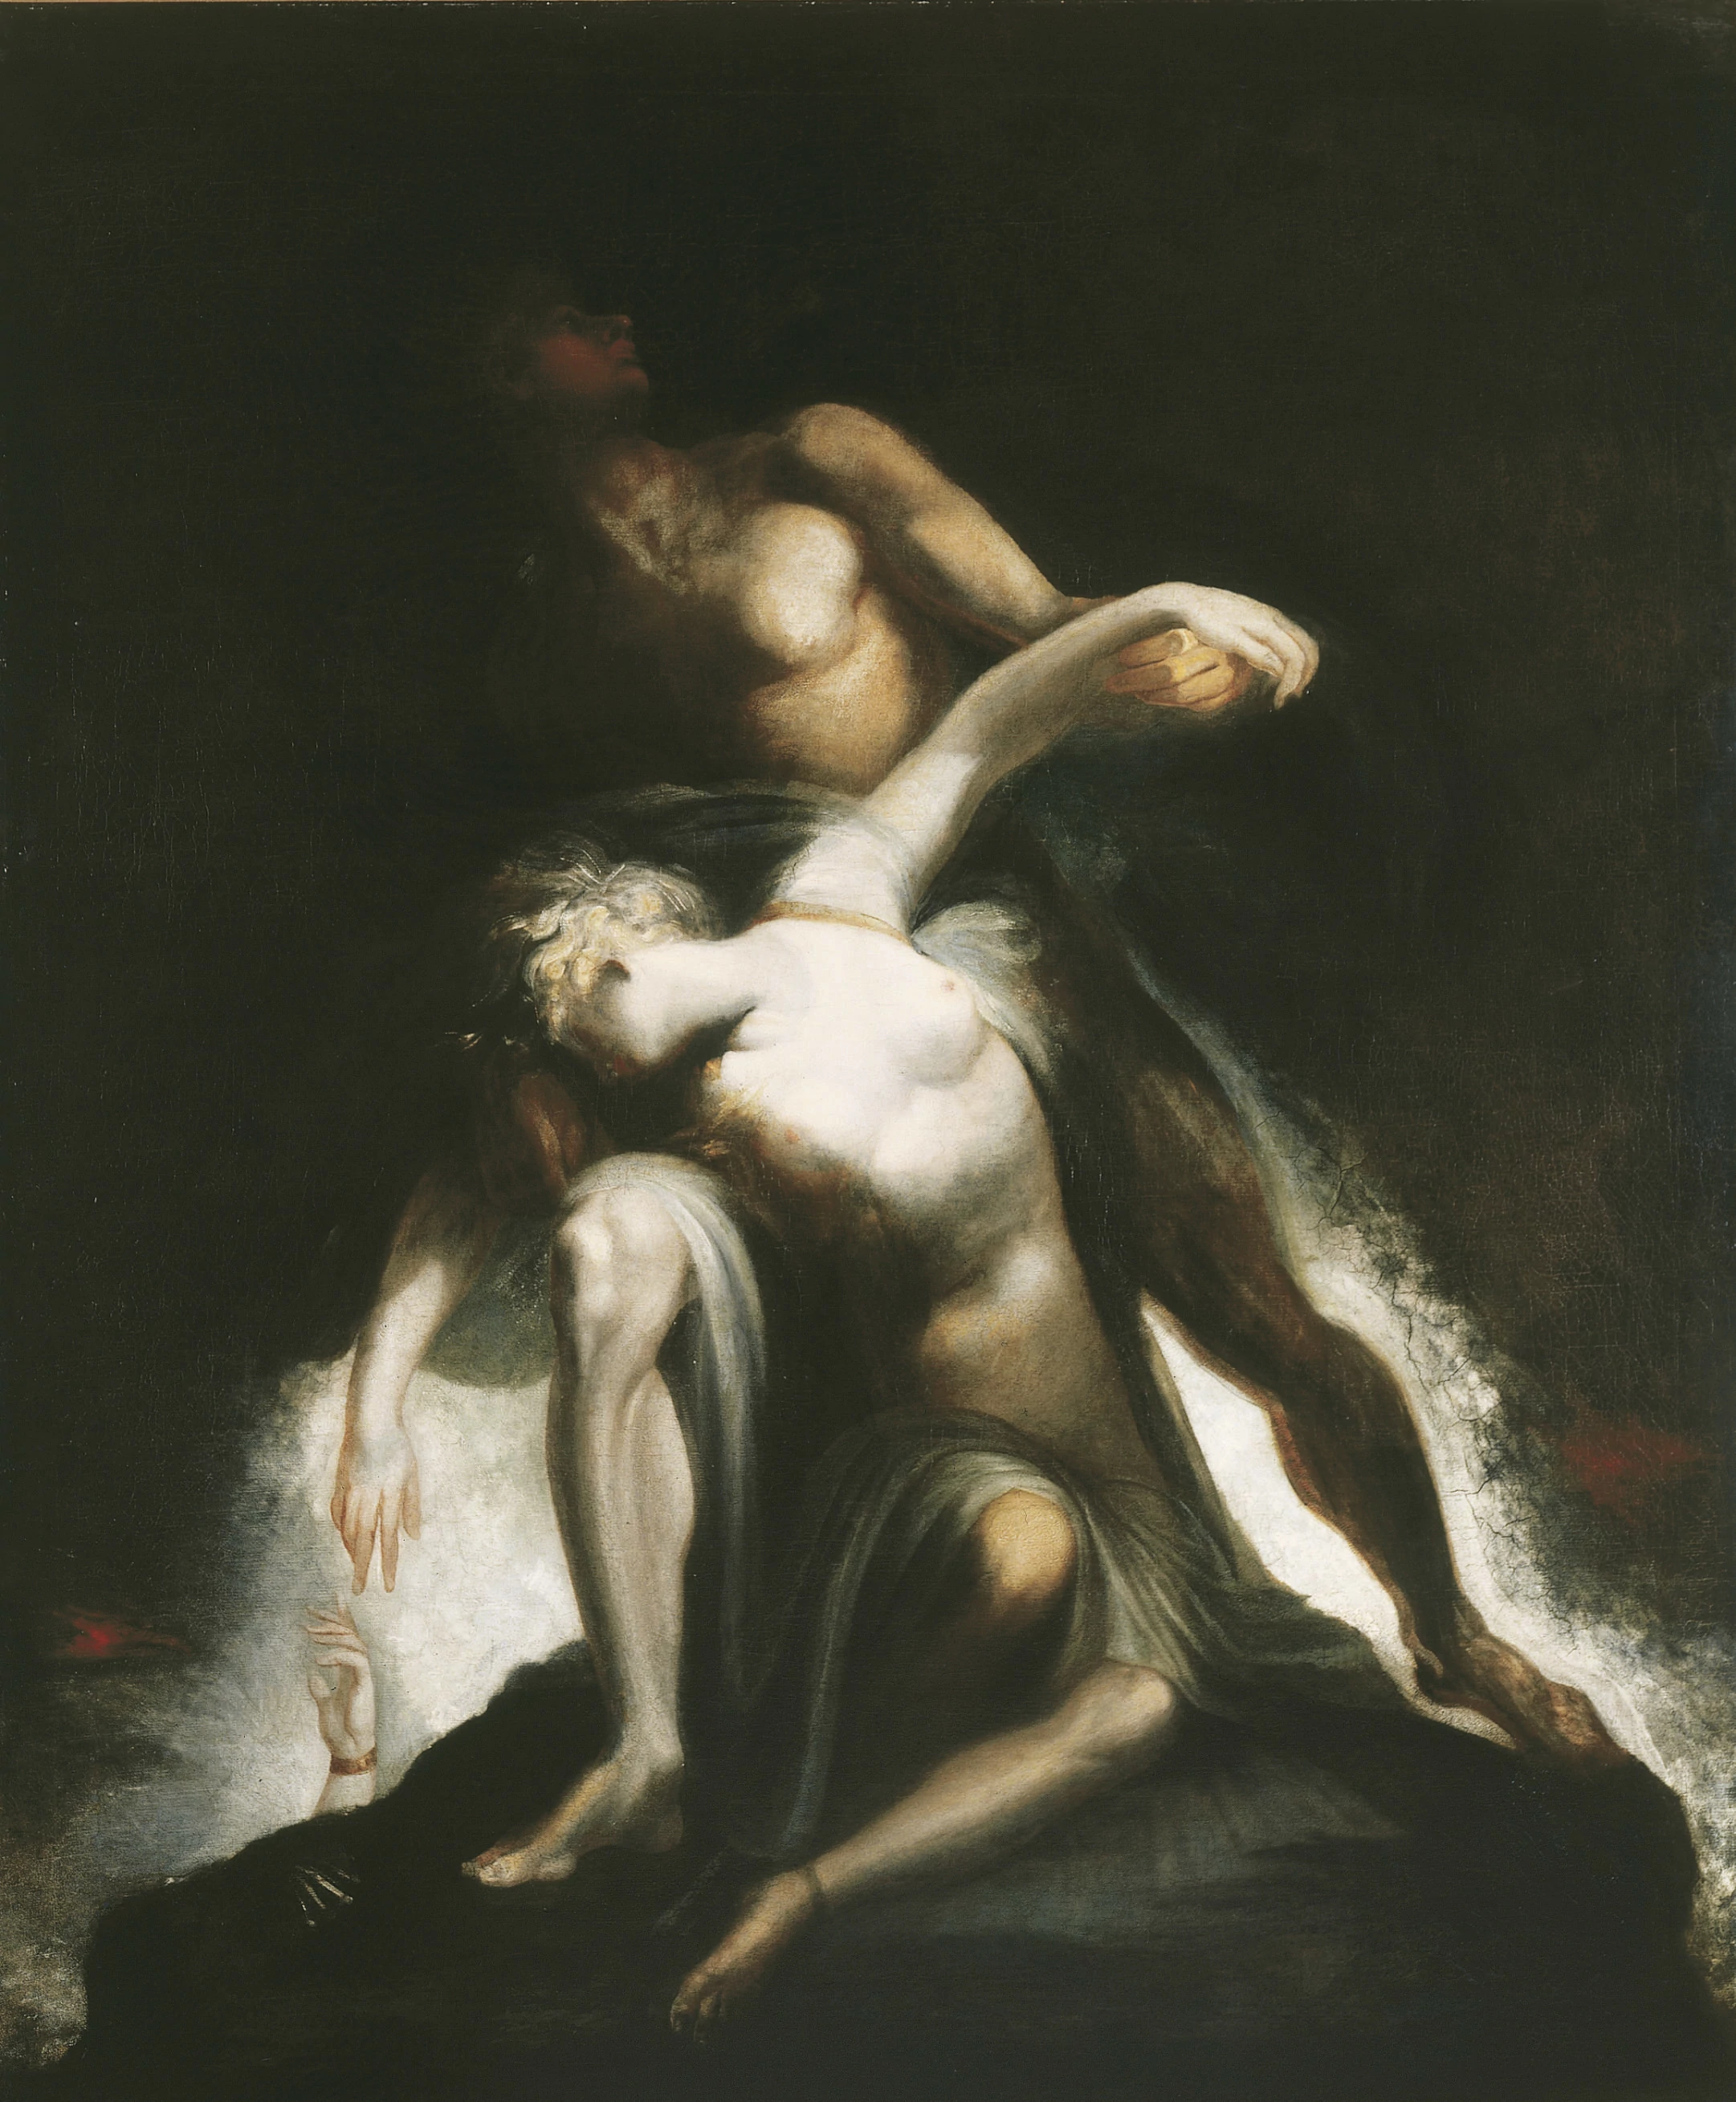 The Vision of the Deluge, Henry Fuseli